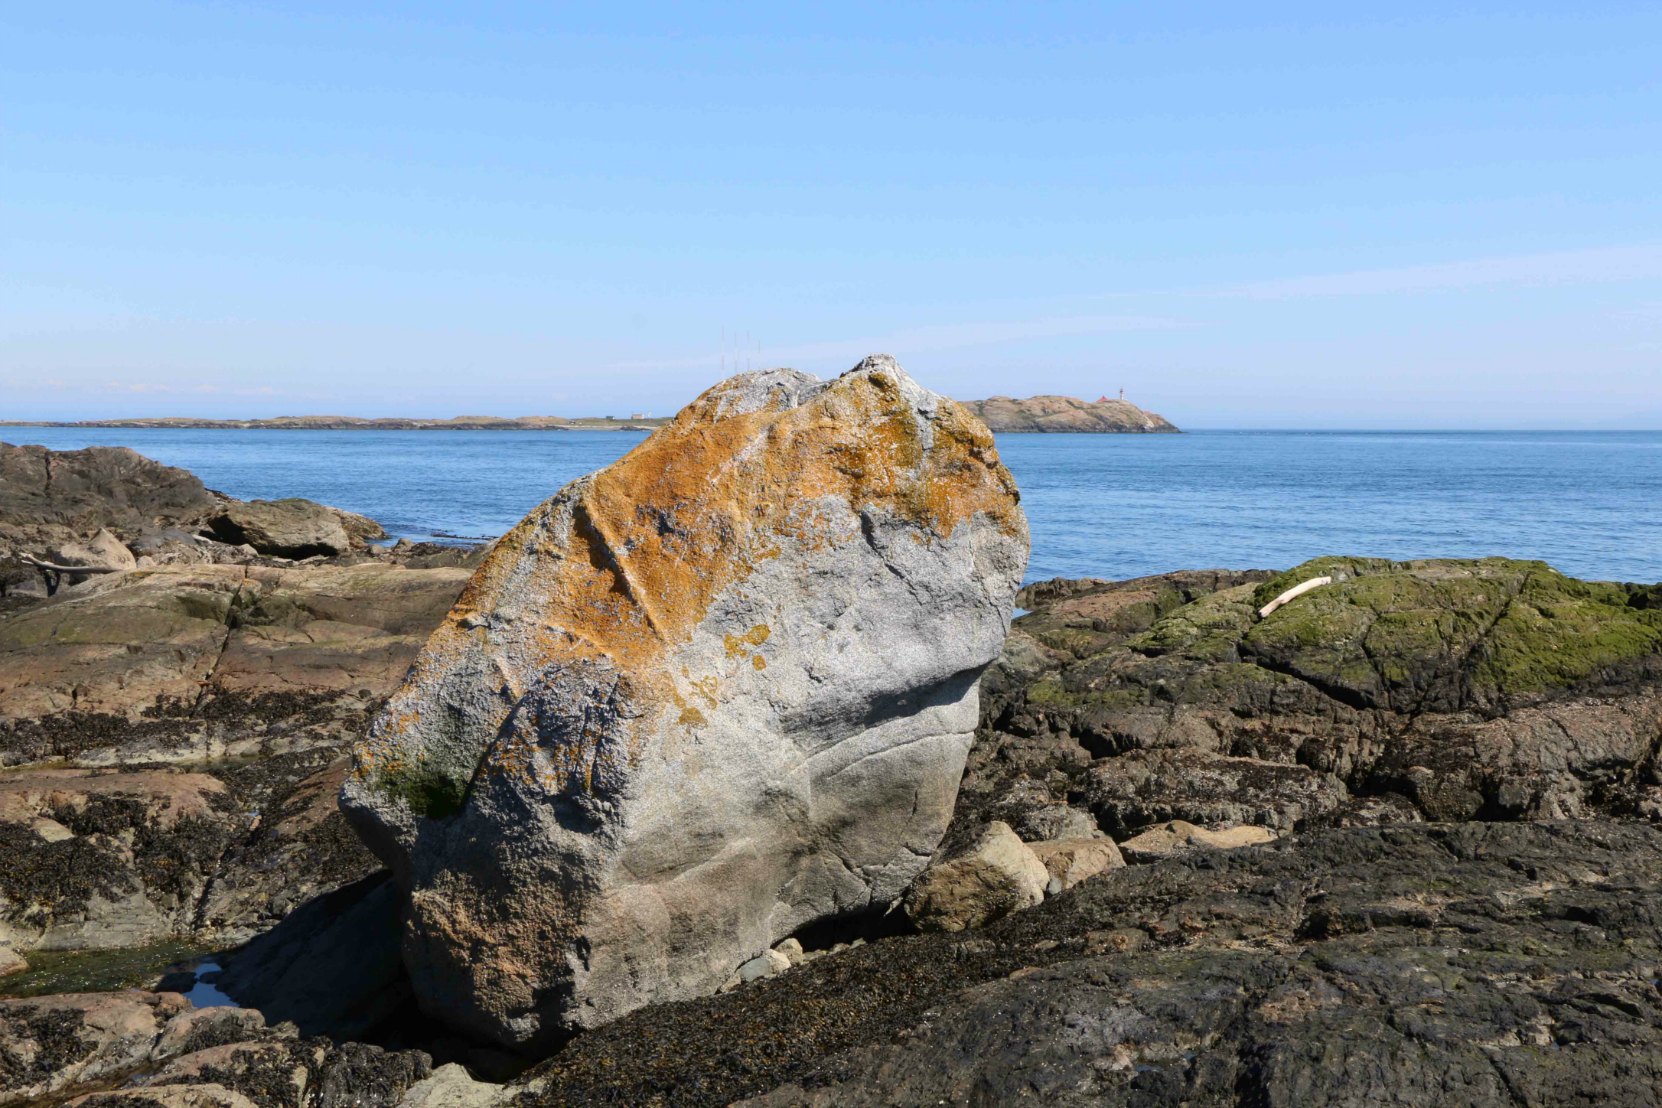 One of two large rocks which were deposited at Harling Point by glaciers as the ice receded at the end of the last Ice Age, 12,000 years ago. A Coast Salish legend says this rock was once a seal hunter who insulted the god Qals, who responded by turning the hunter to stone.